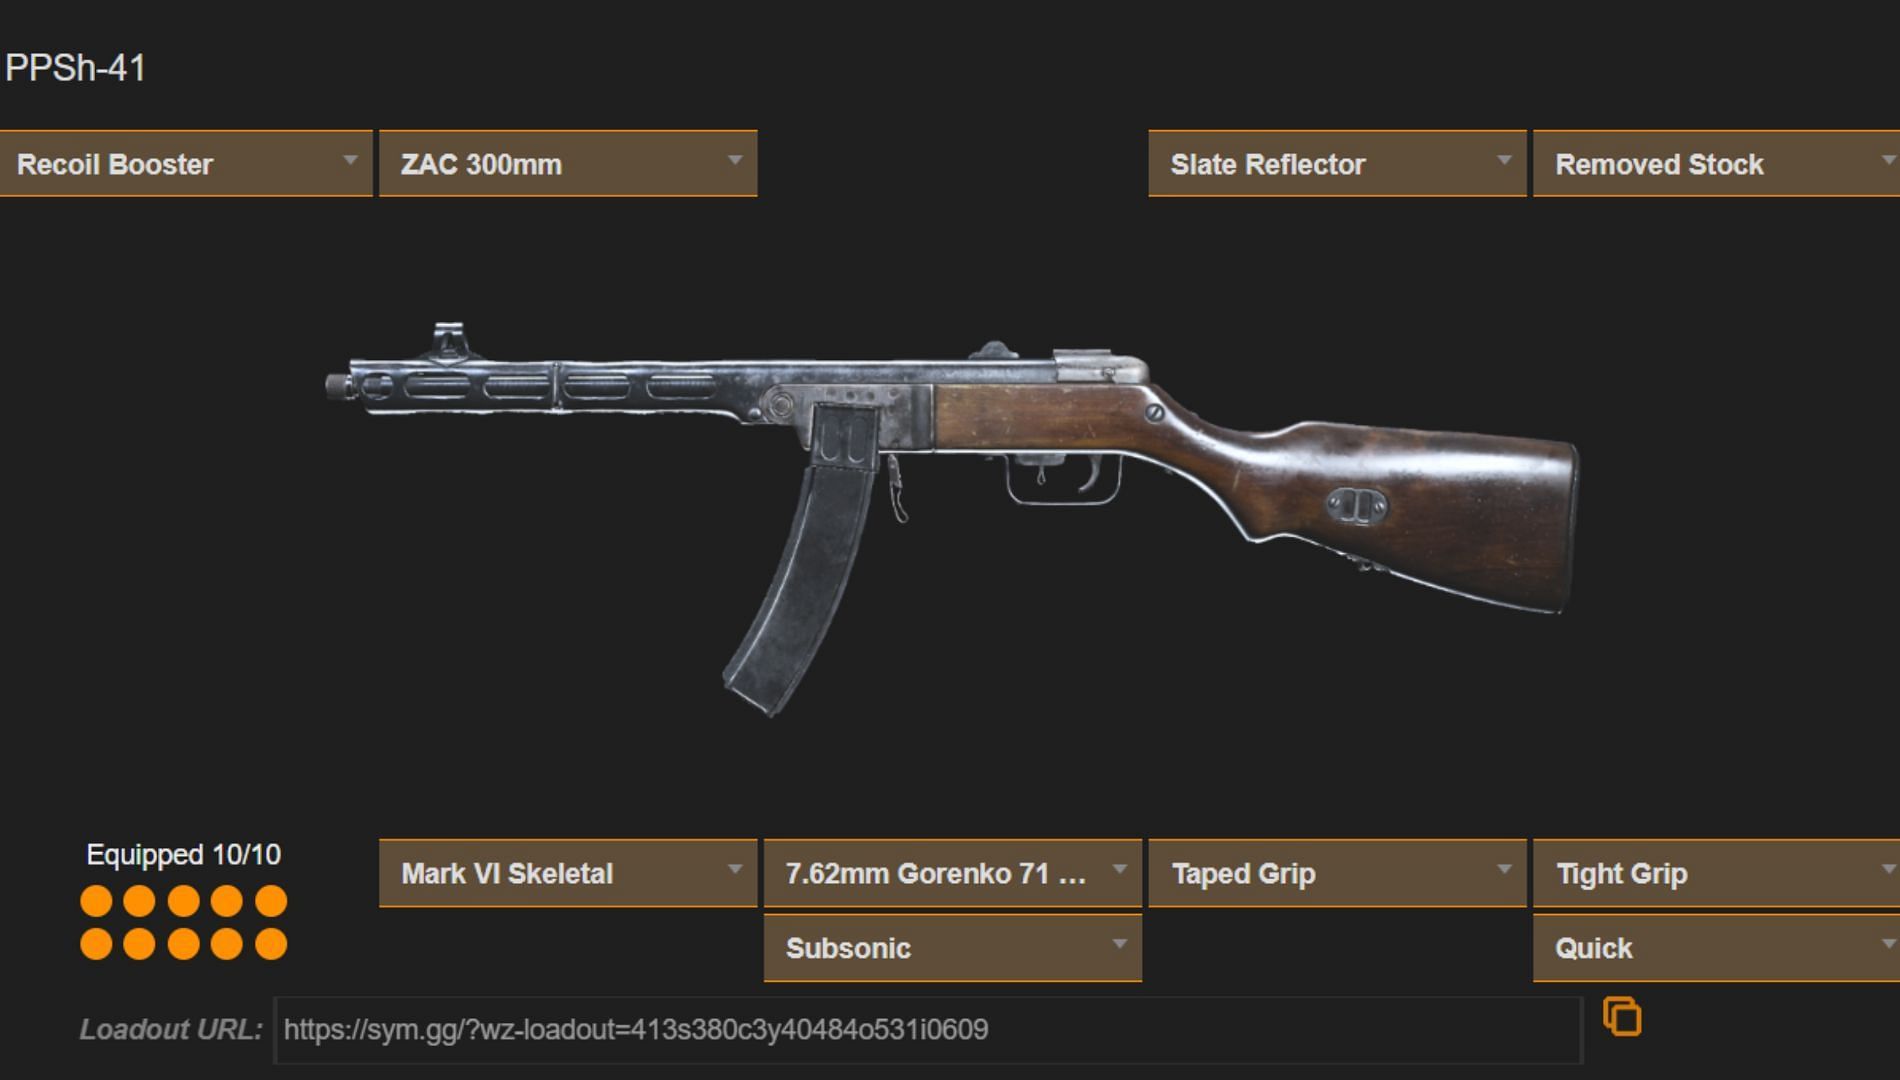 Call of Duty Warzone Vanguard PPSh-41 loadout (Image via sym.gg)